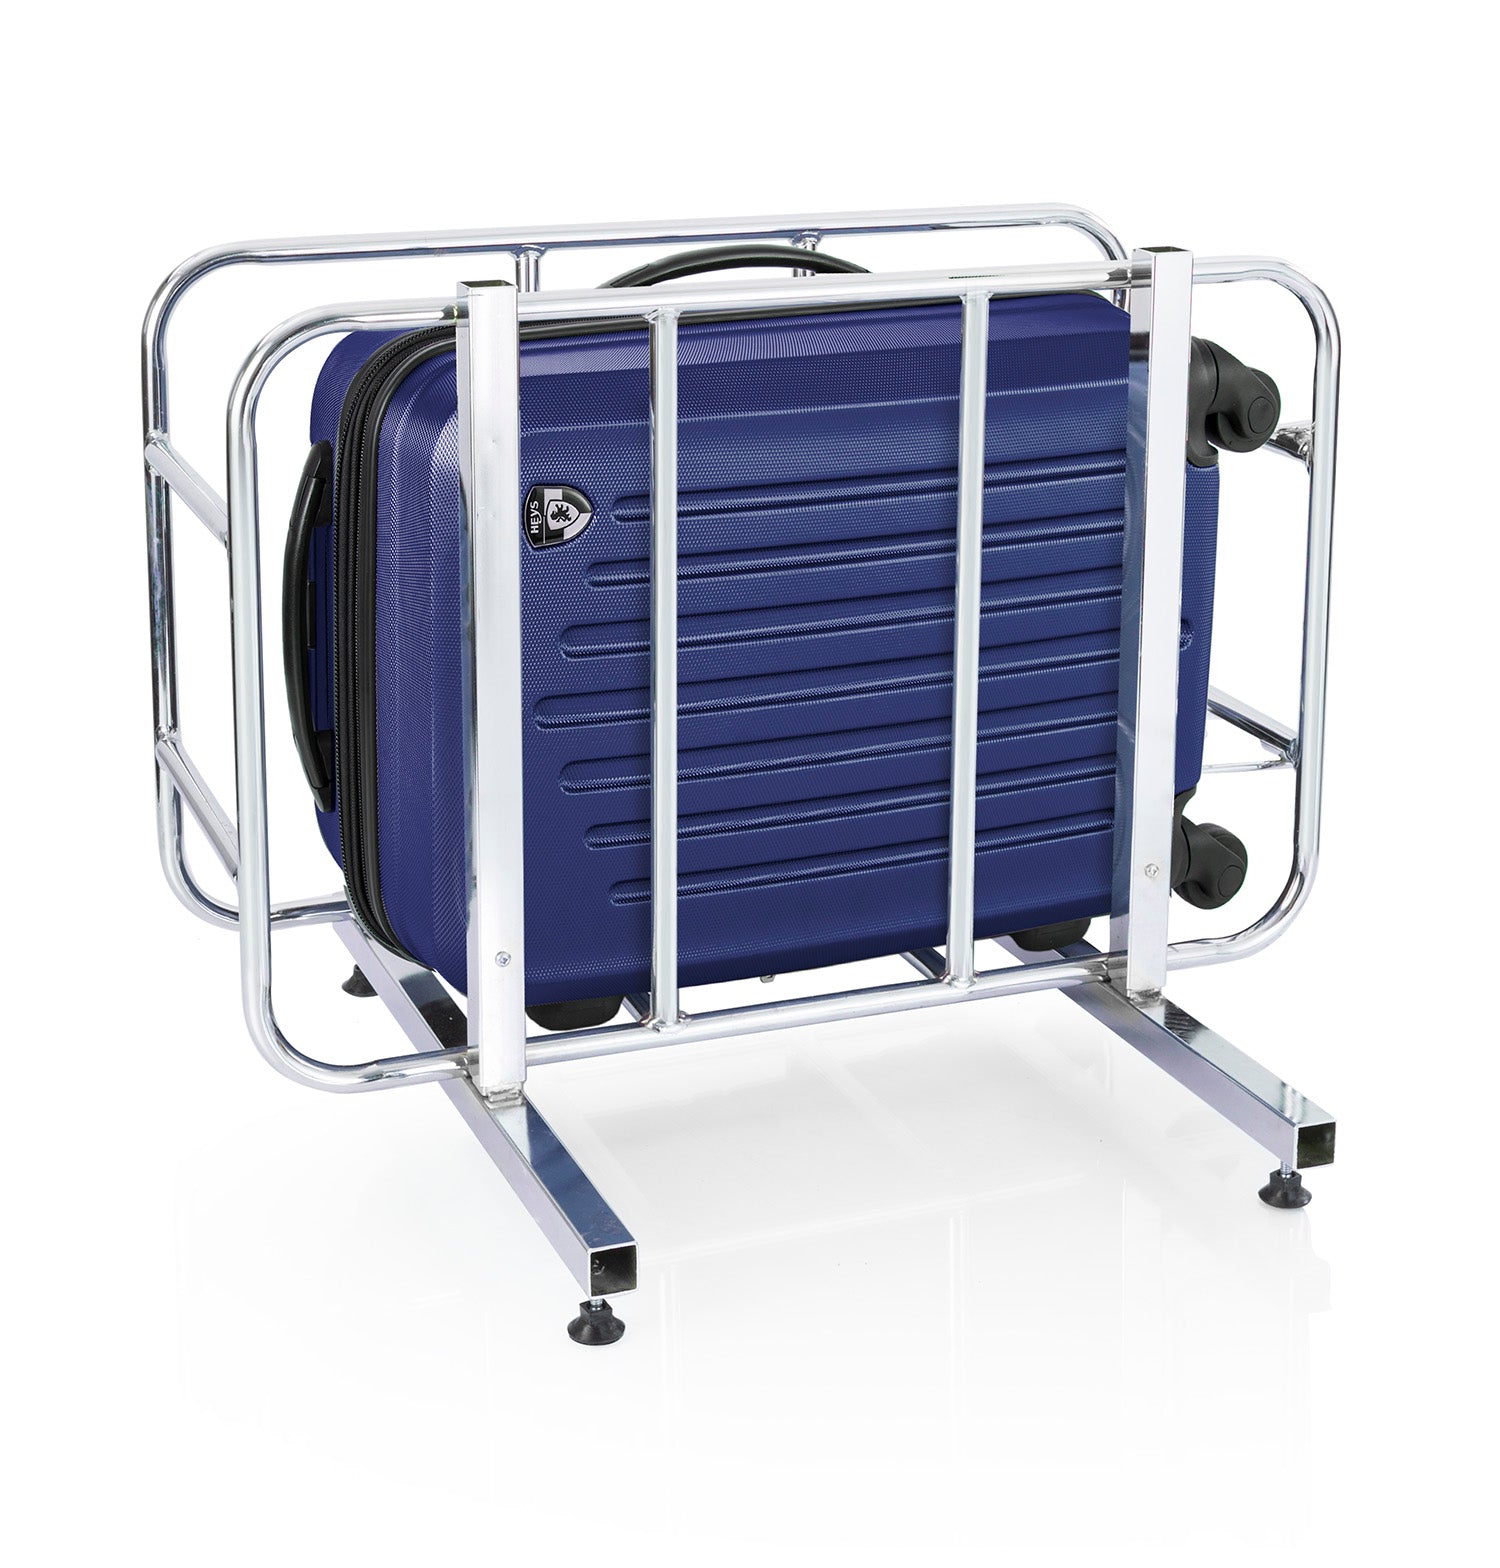 Vault 21" Spinner Carry-on Luggage